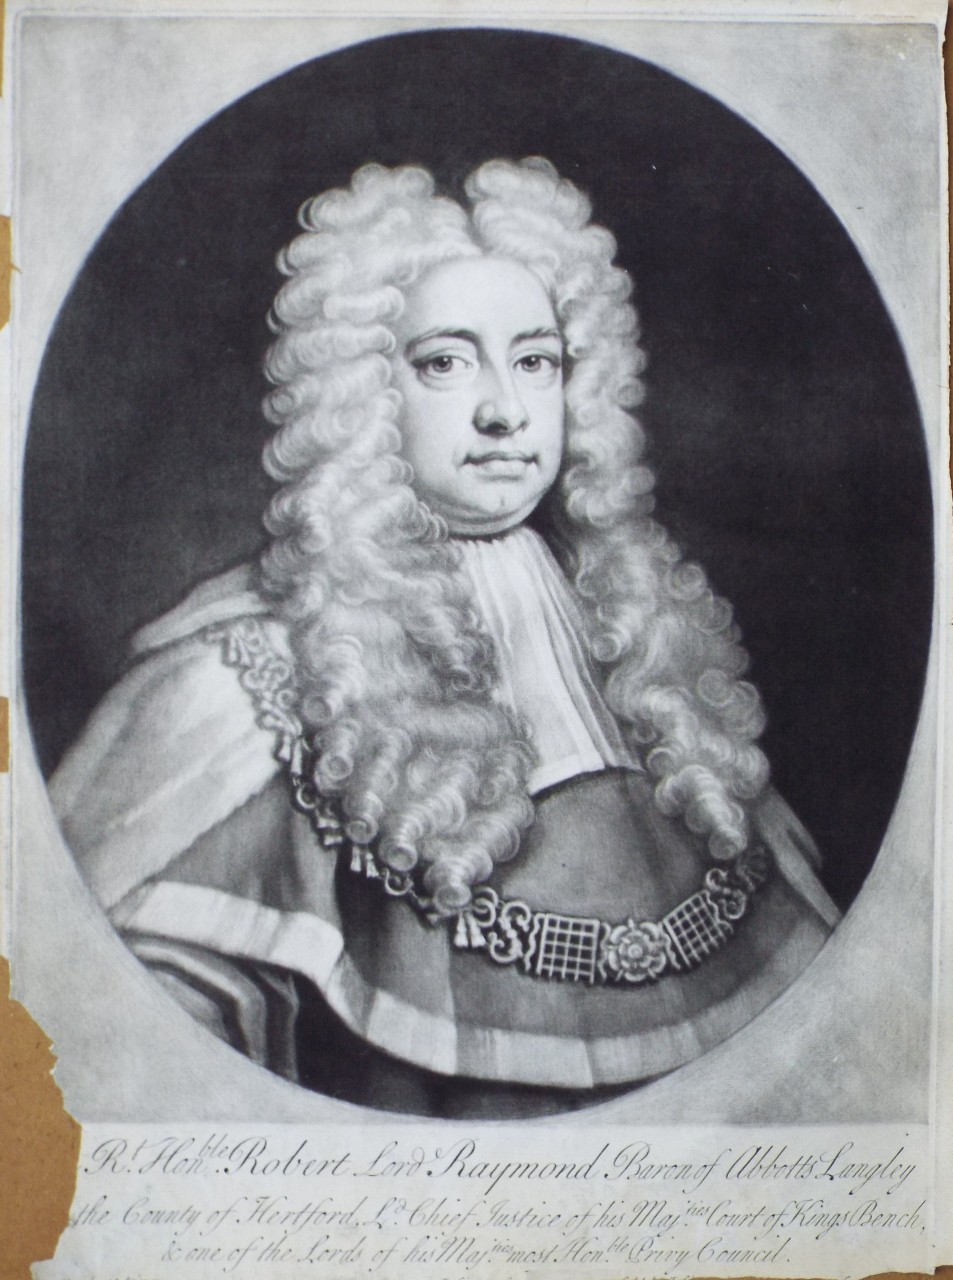 Mezzotint - The Rt. Honble. Robert Lord Raymond Baron of Abbotts Langley in the County of Hertford, Ld. Chief Justice of his Maj'ties Court of Kings Bench & one of the Lords of his Maj'ties Honble. Privy Council - Simon